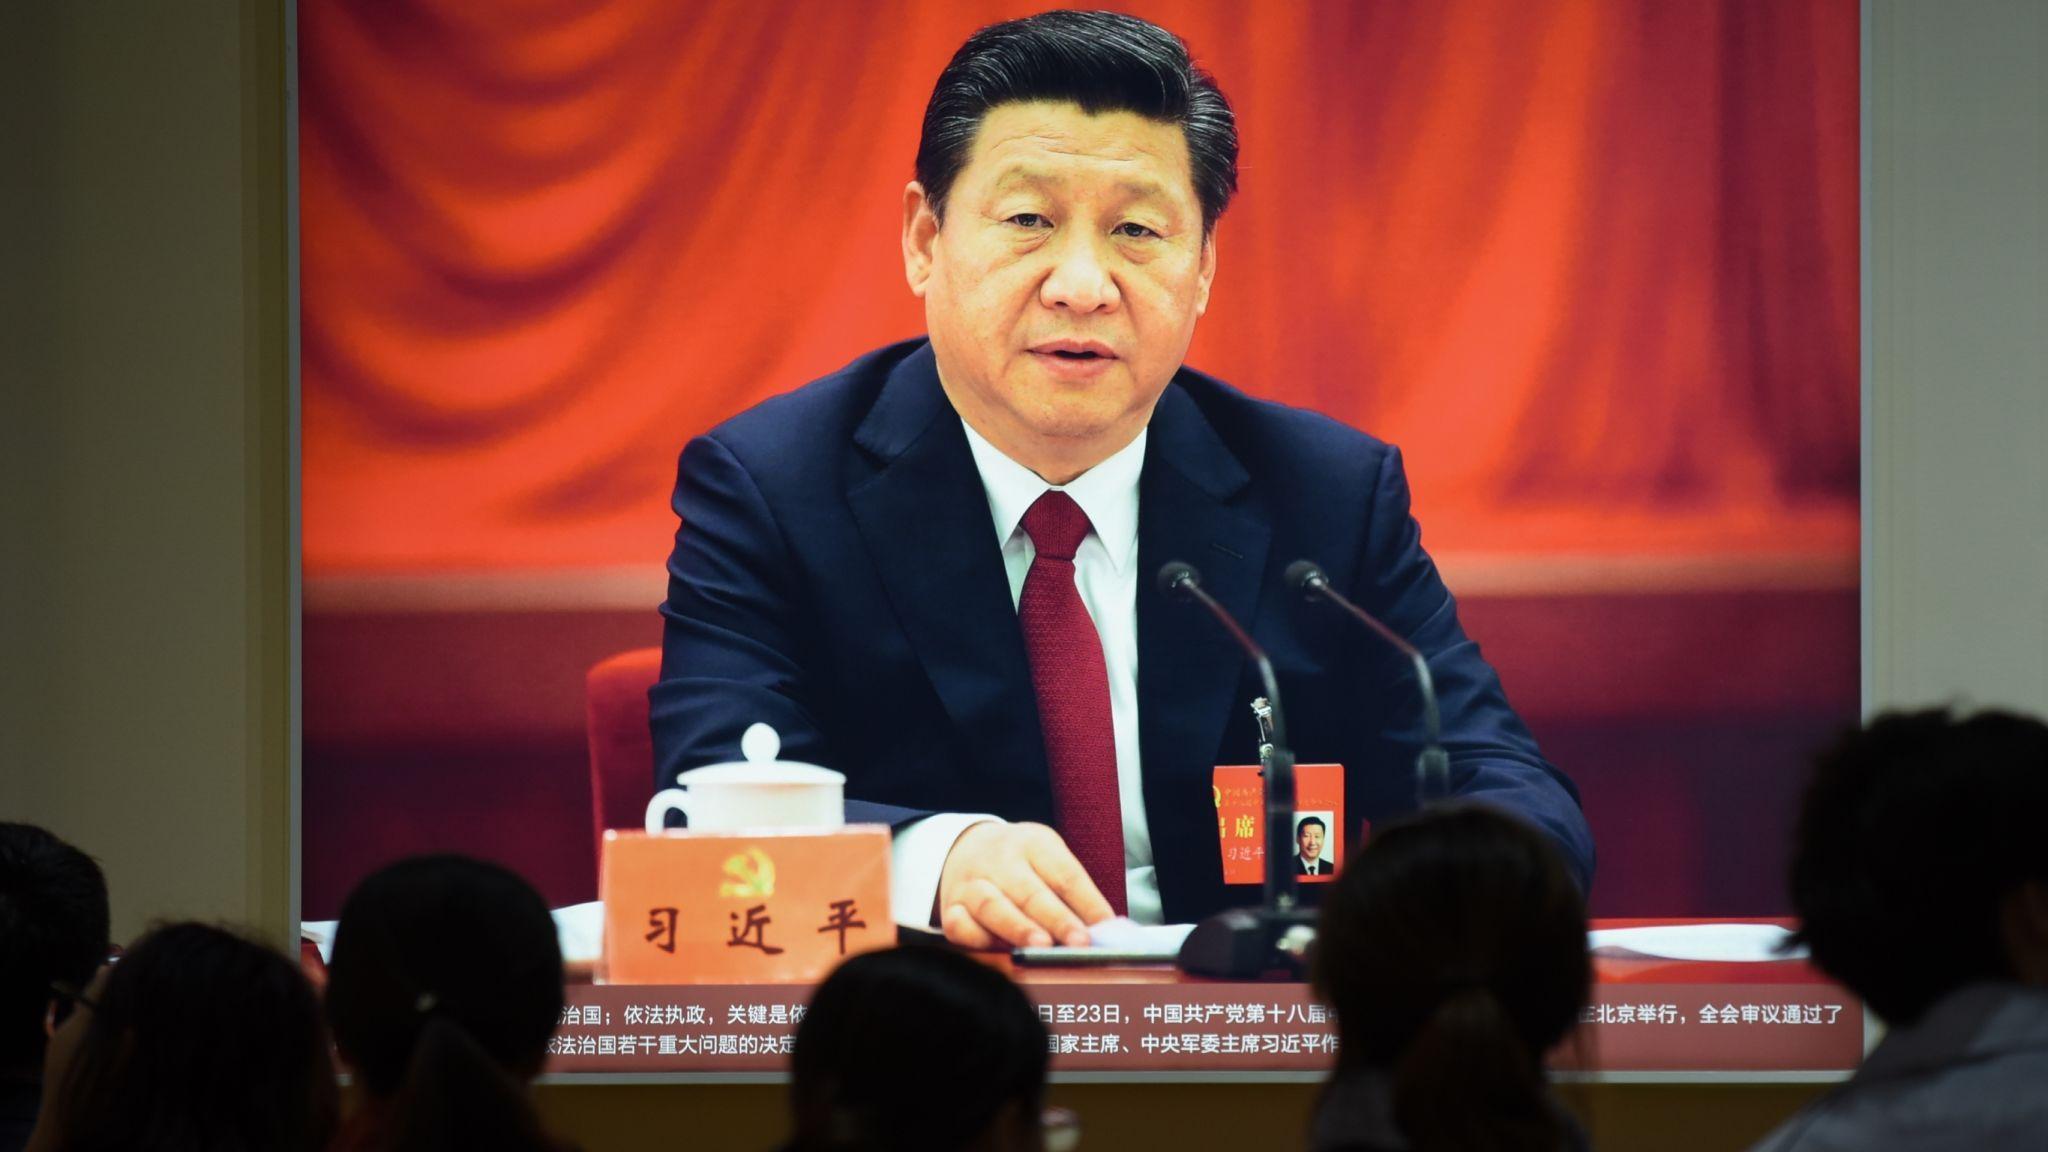 Is China's leader Xi Jinping doing a Vladimir Putin by